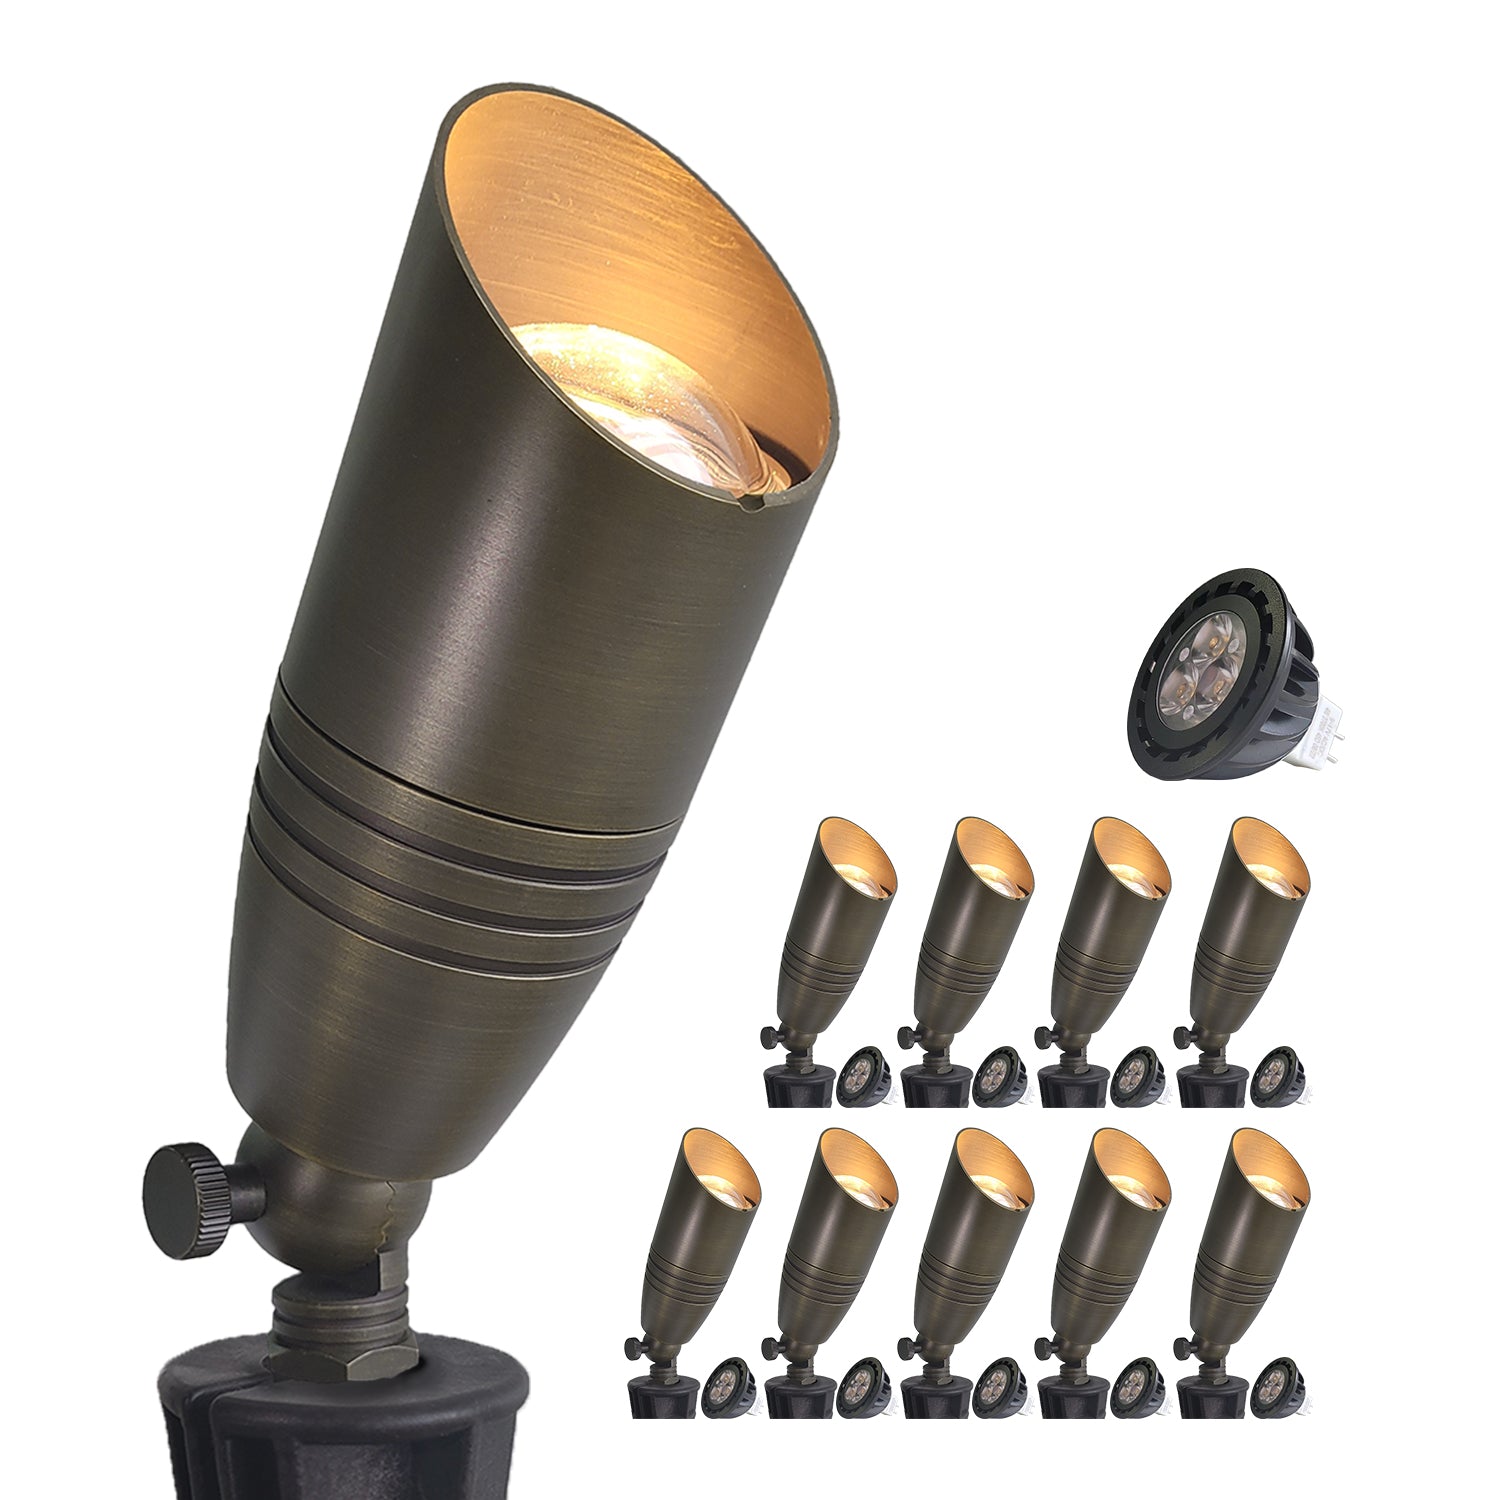 Brass LED landscape tree lighting set, low voltage outdoor spotlights COA102B with illuminated and unlit examples